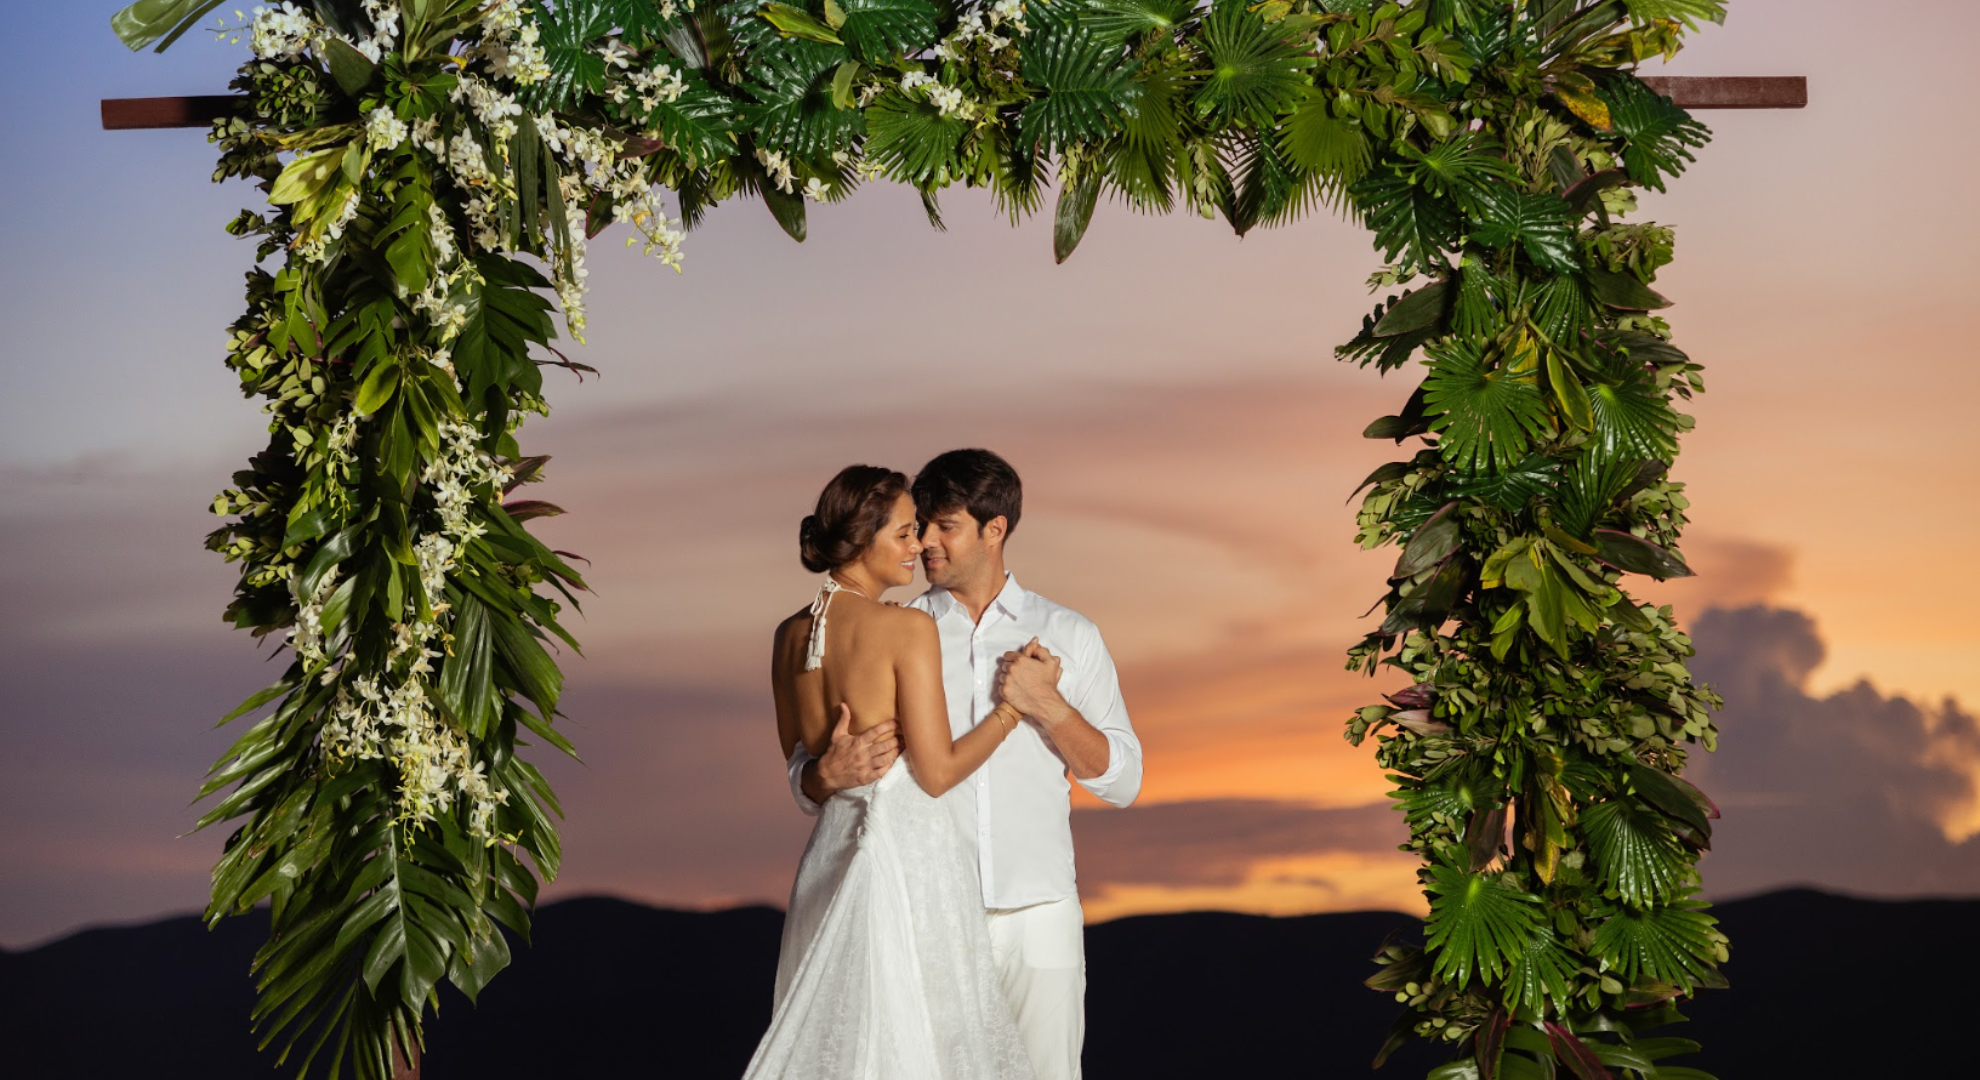 Discover unforgettable weddings with Discovery Hospitality